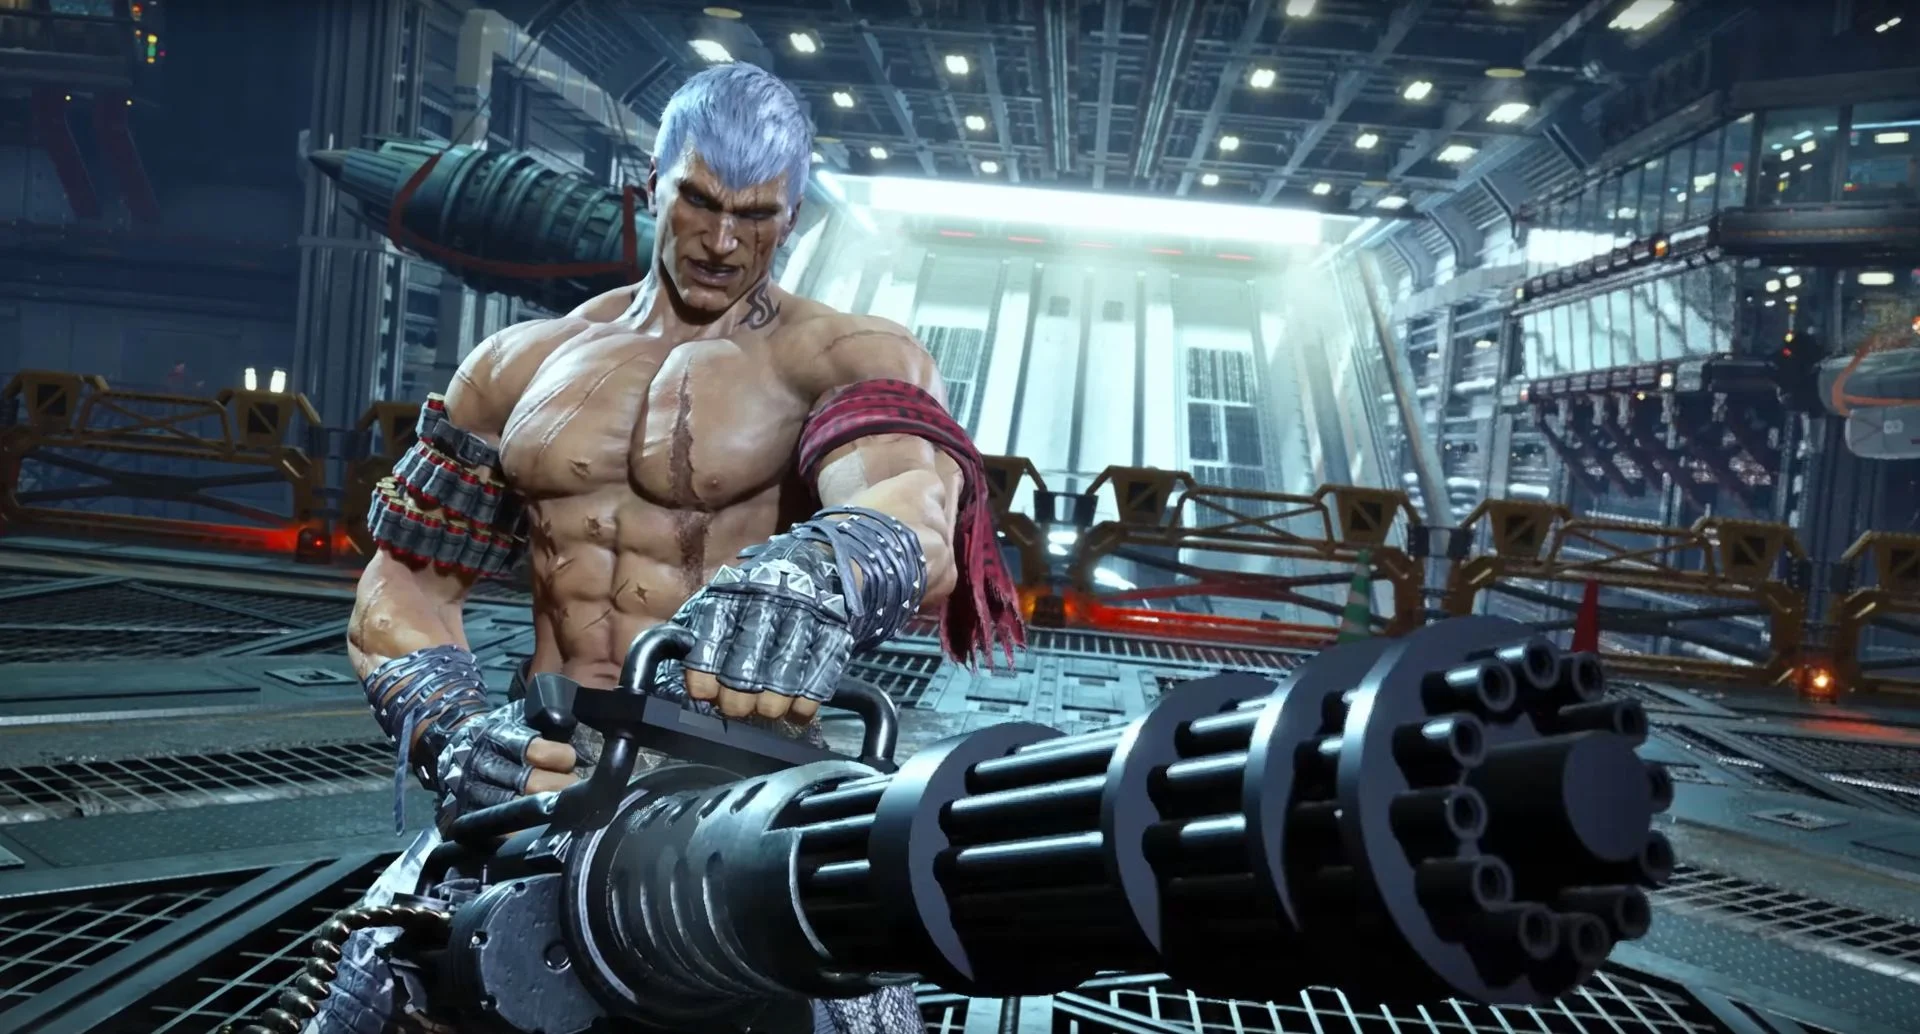 Tekken 8 gets another trailer showing the series' iconic antagonist